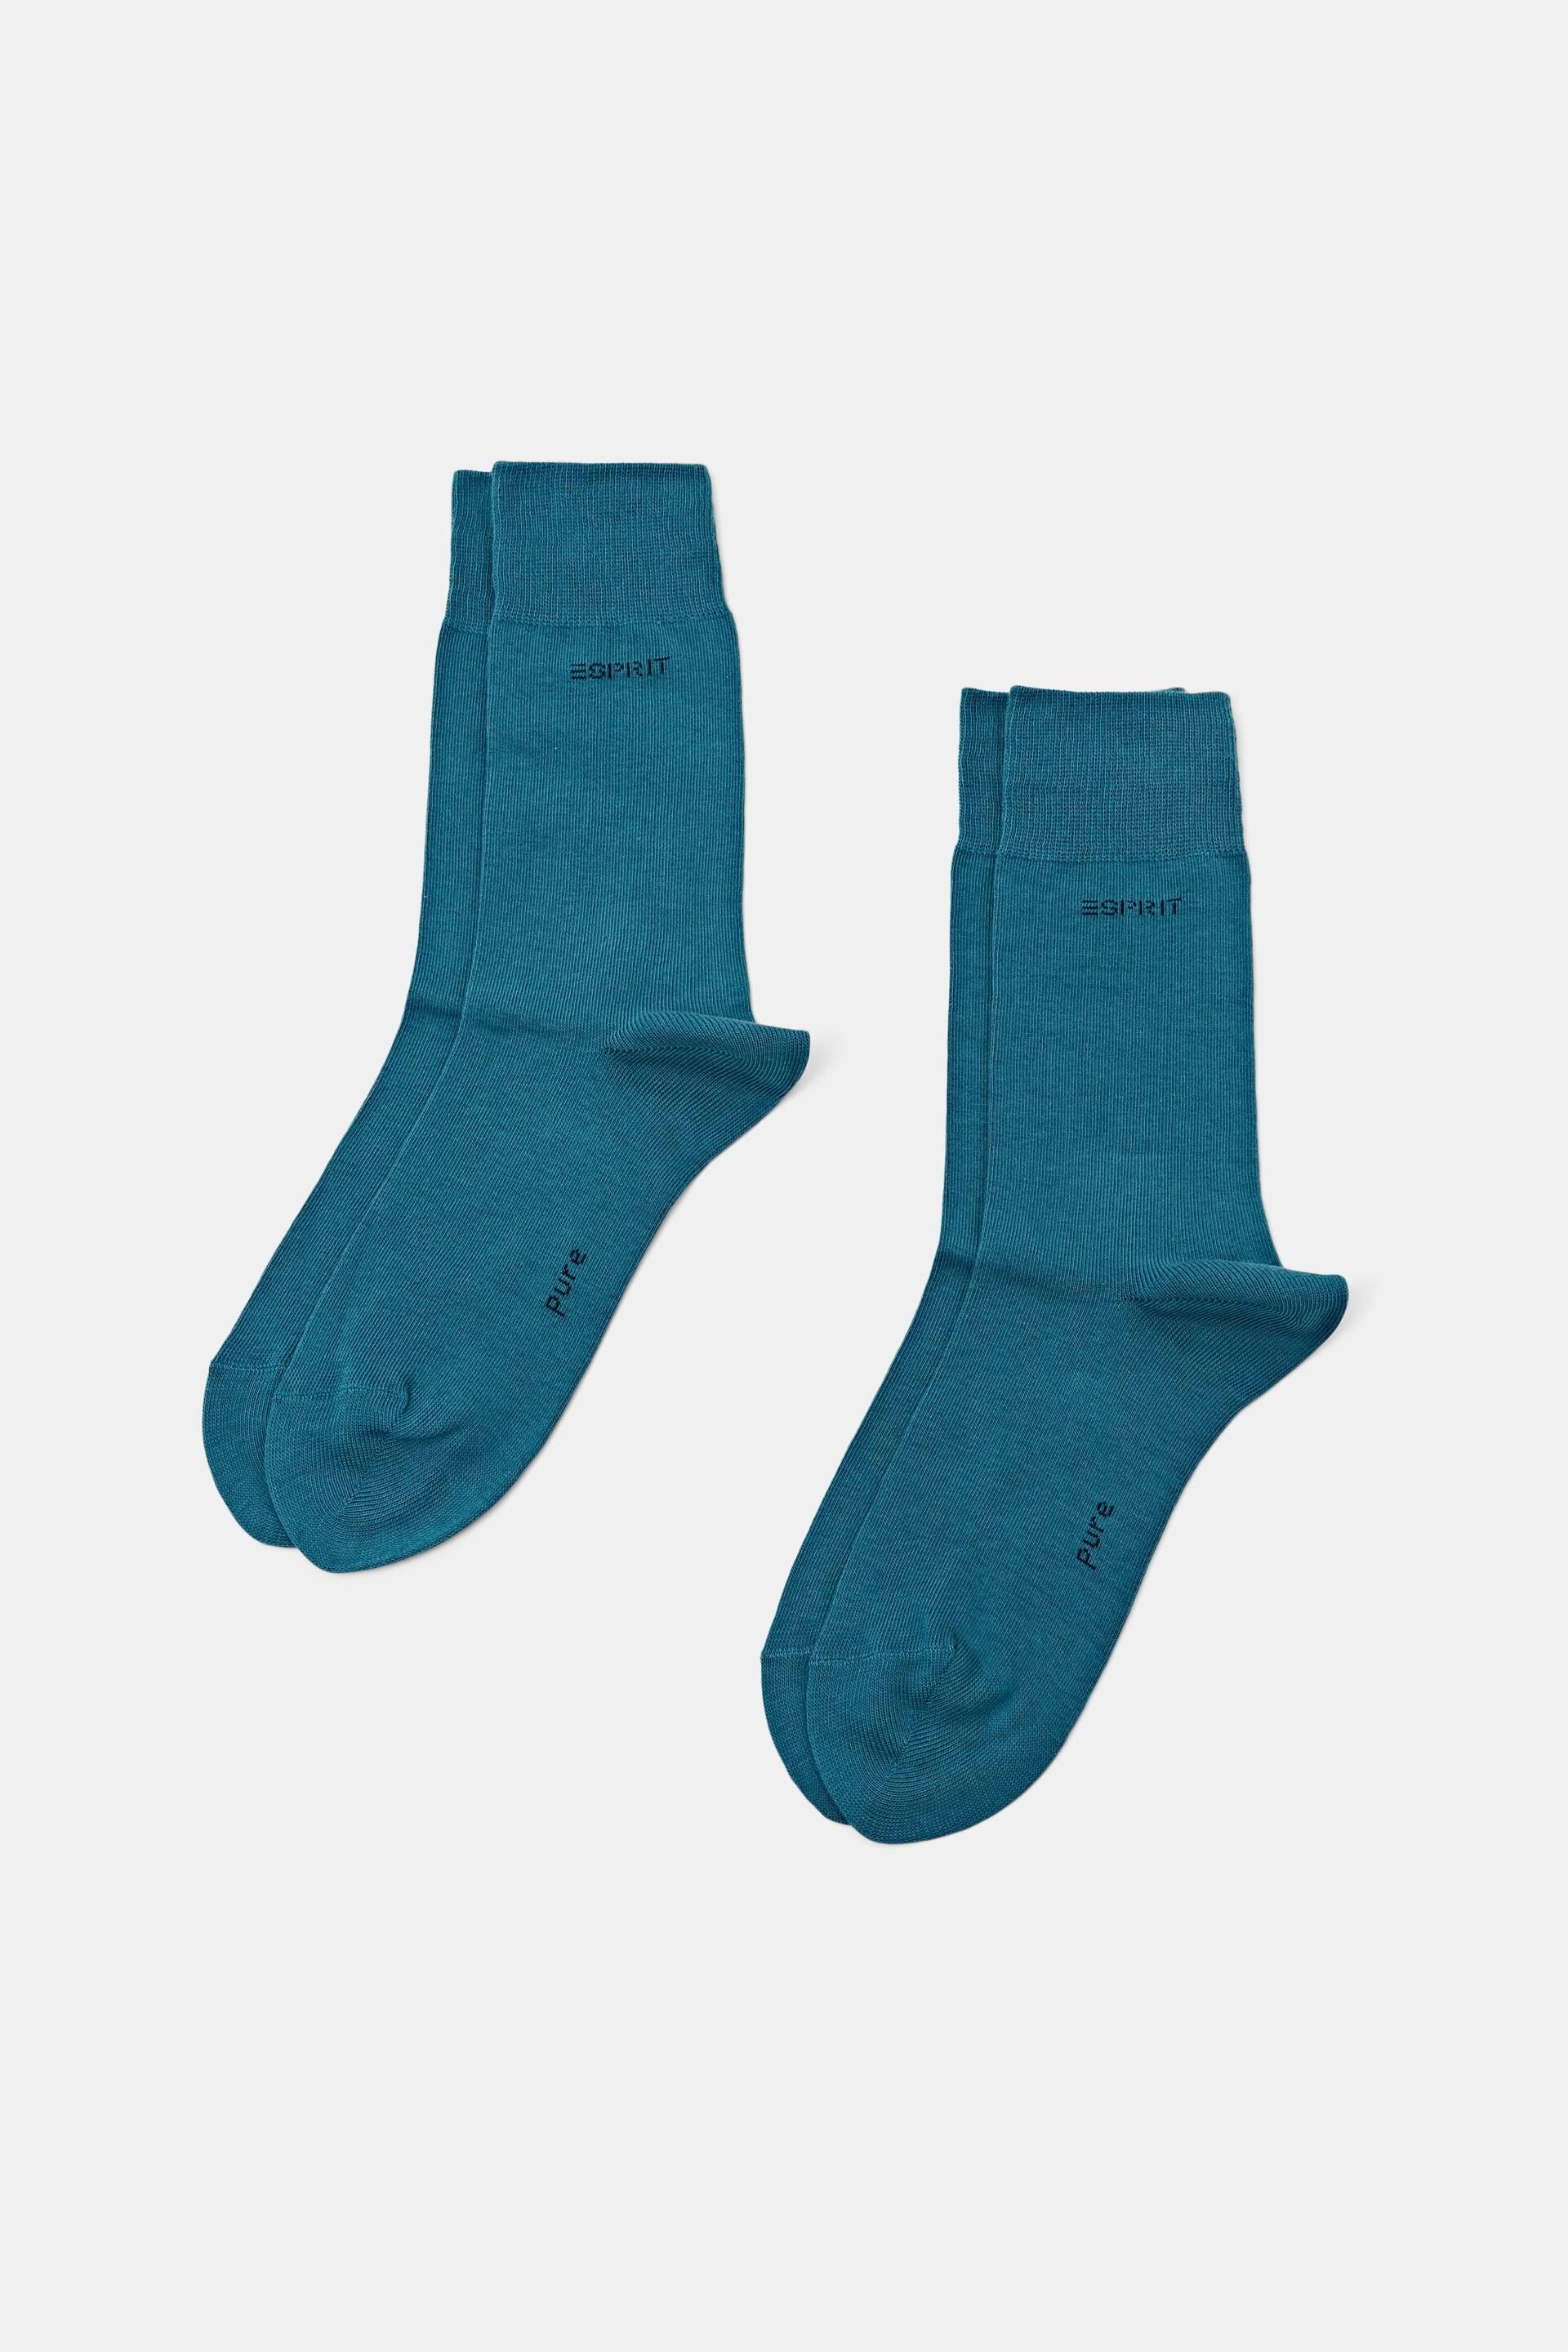 Esprit Mode Double pack of socks made of blended organic cotton